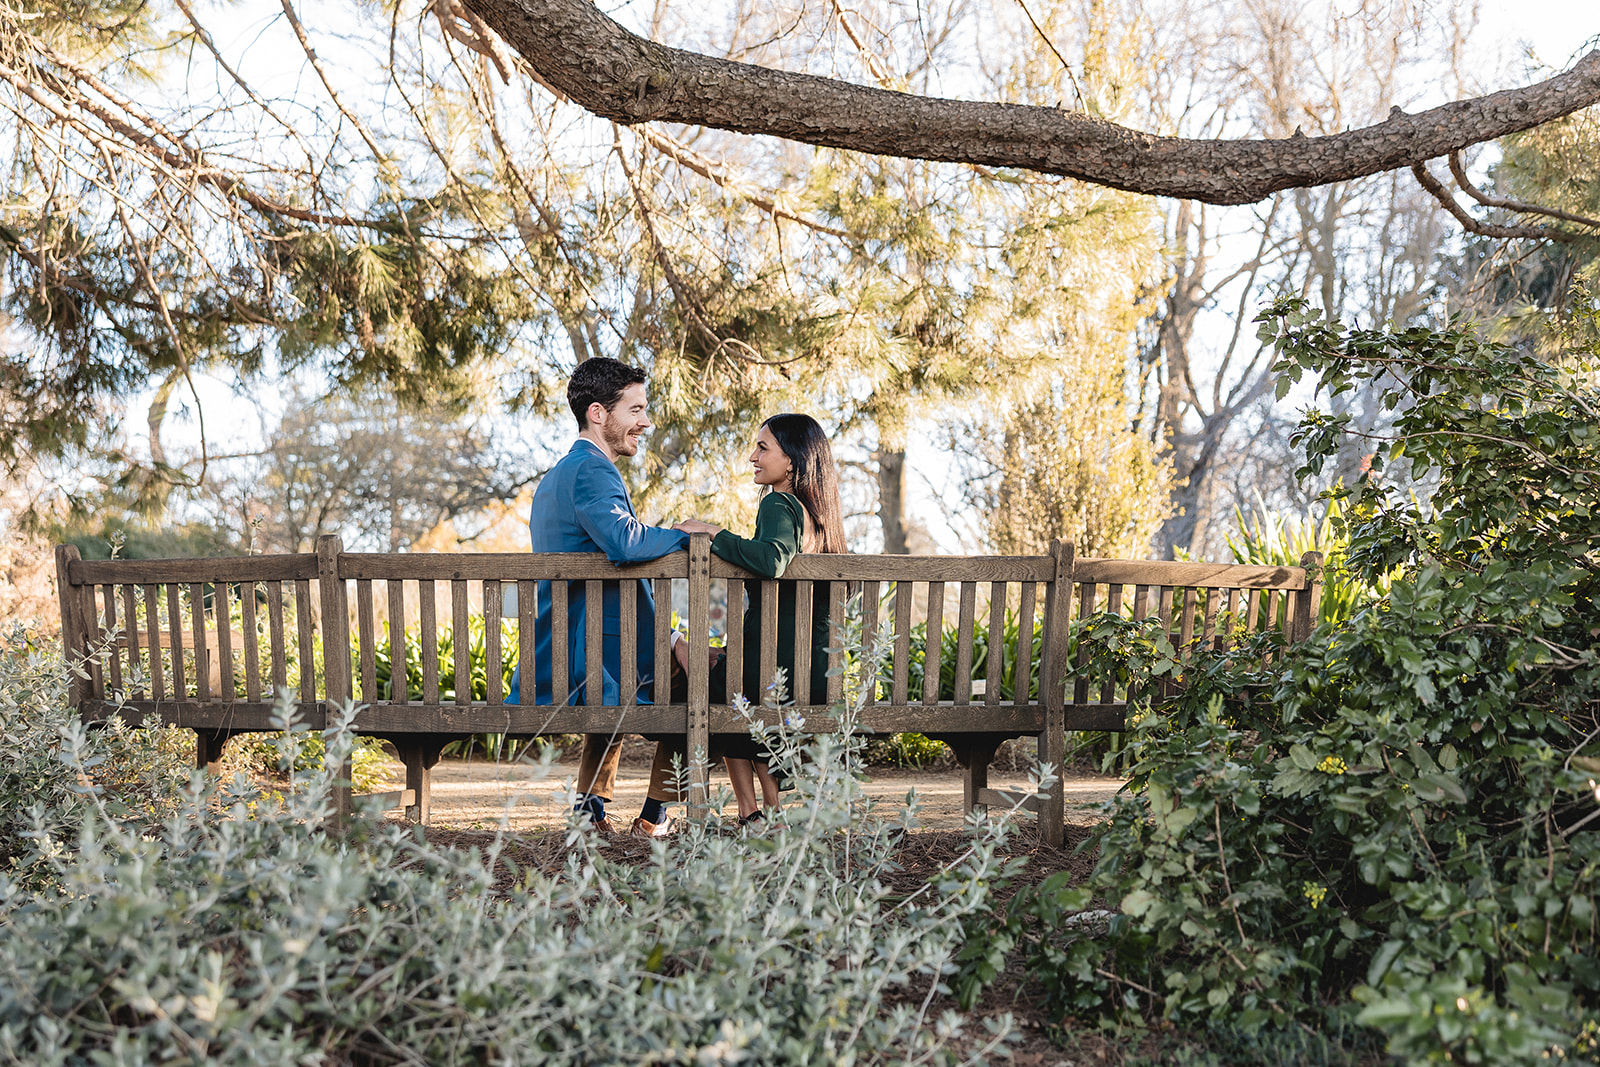 Couple sites on a bench and looks at each other lovingly surrounded by greenery. Photo by sacramento photographer.